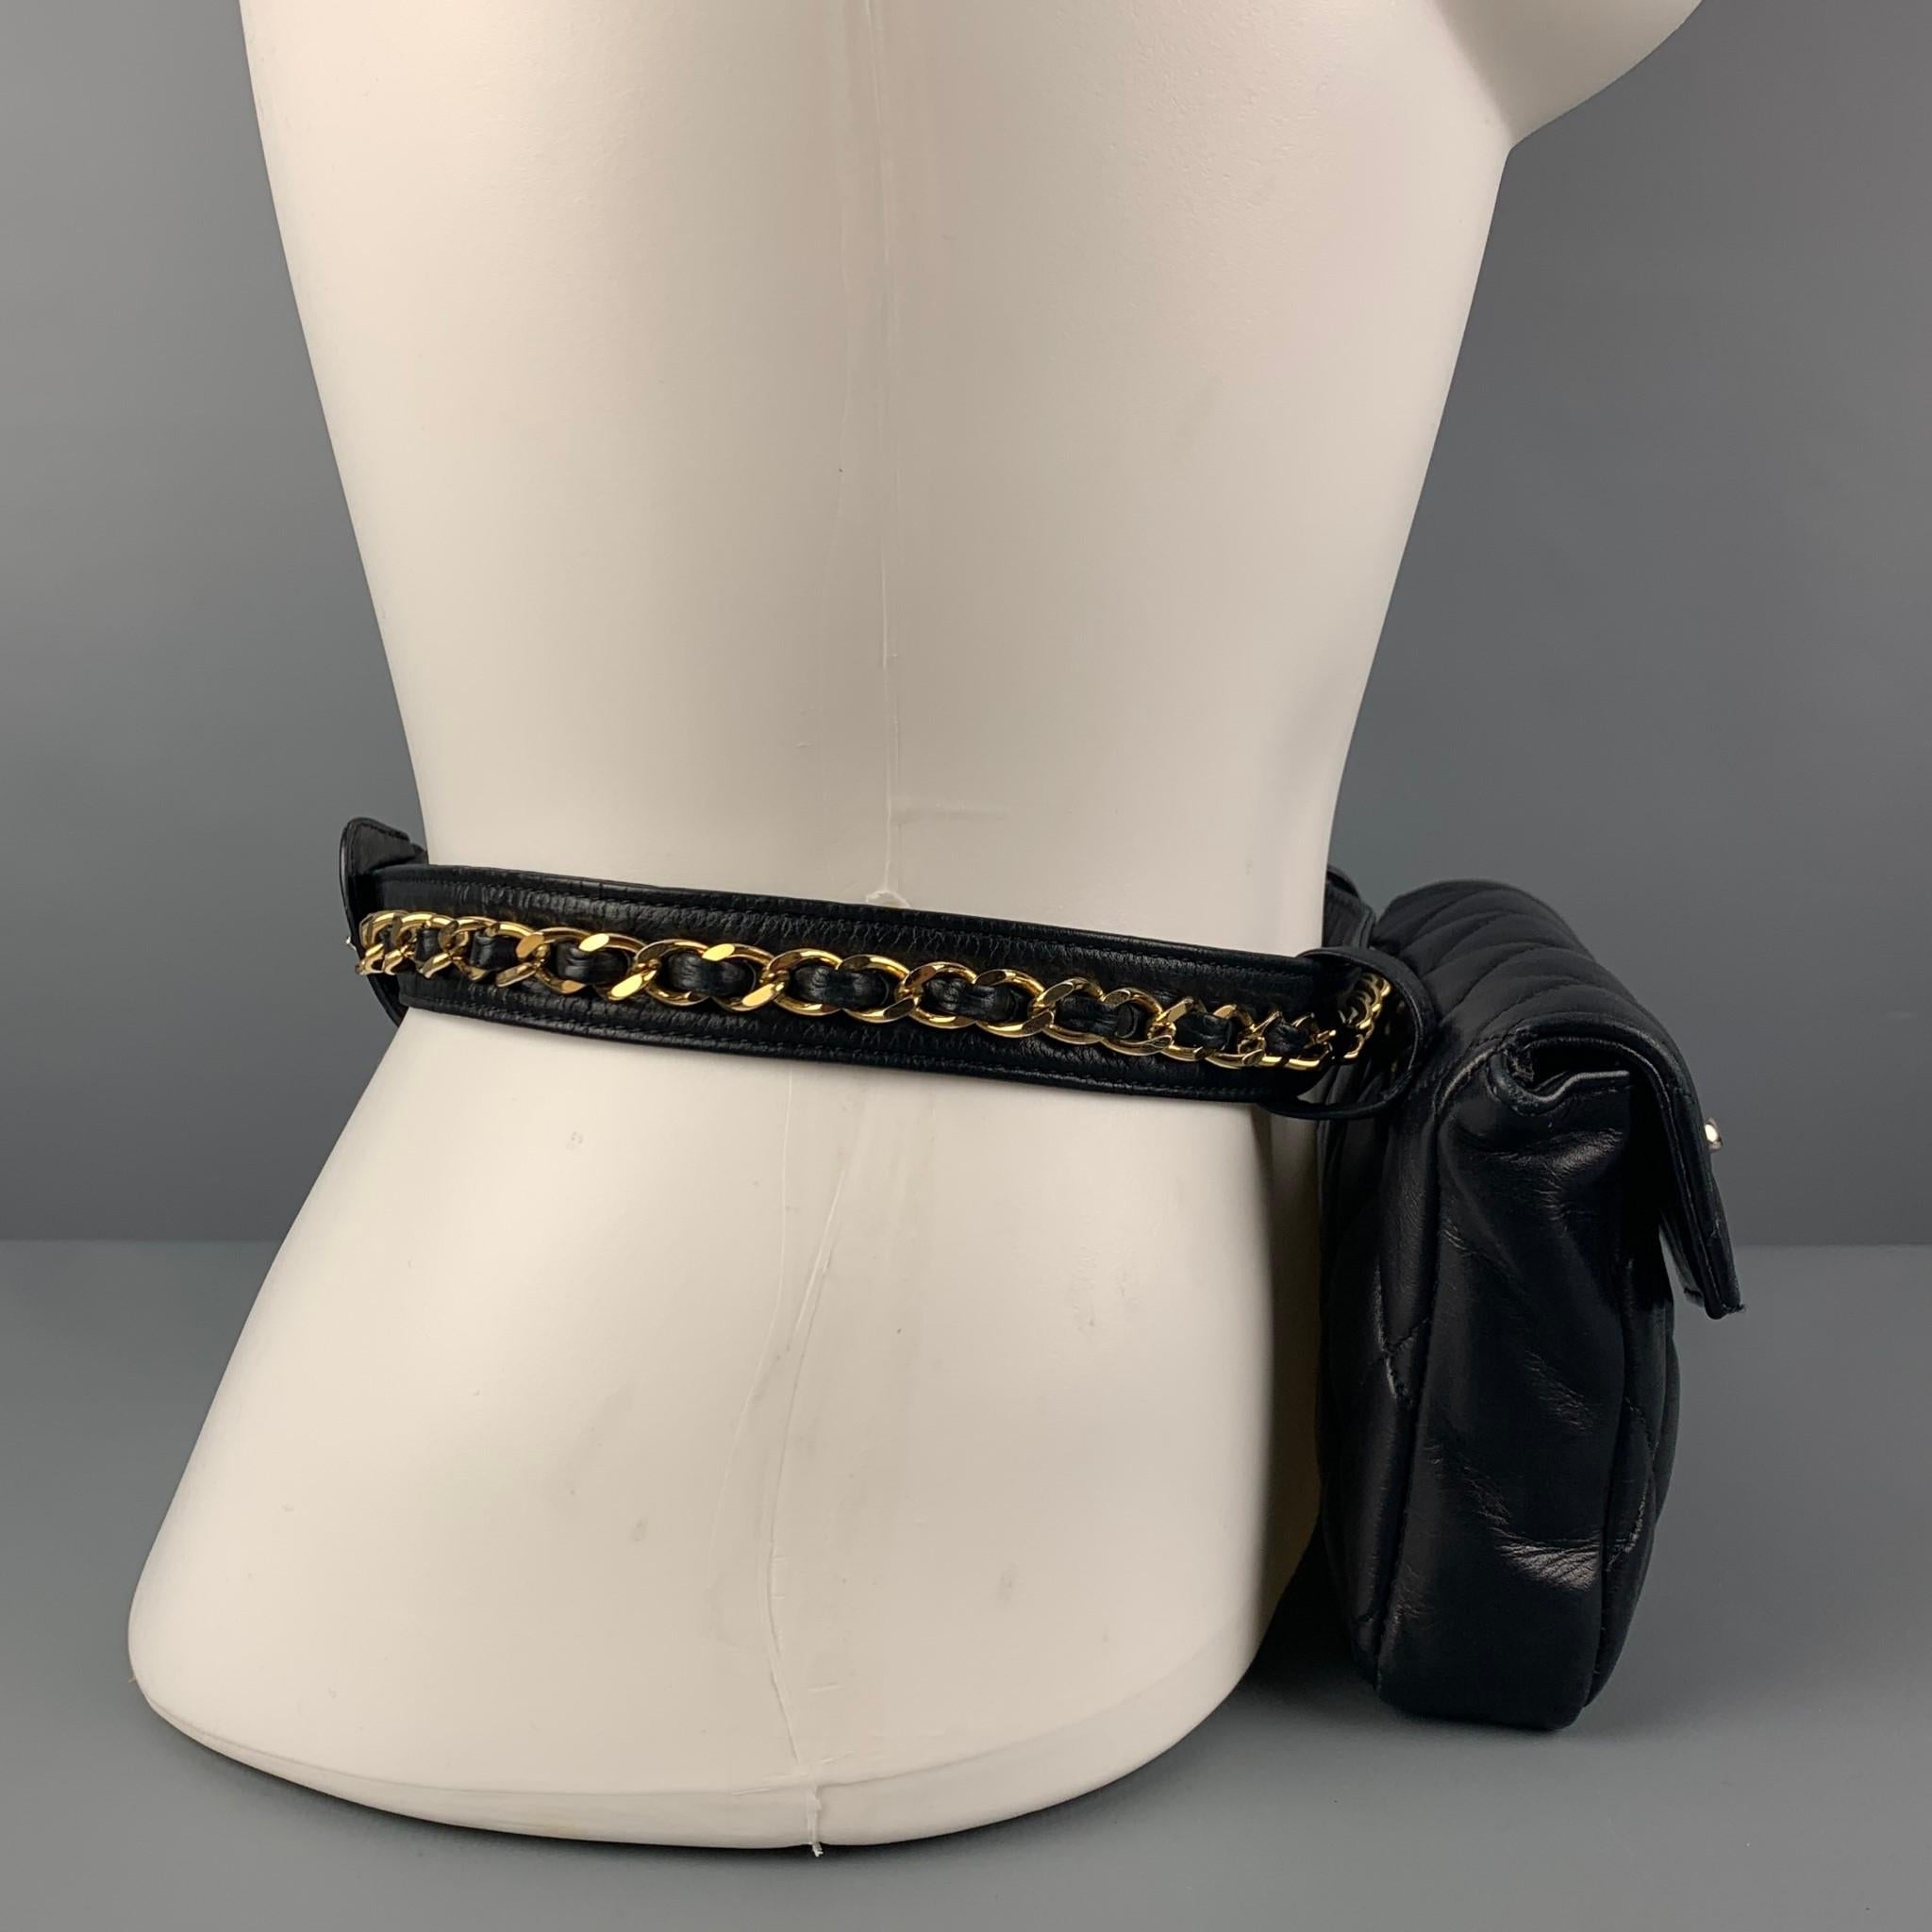 Vintage 80's CHANEL belt-bag comes in a black quilted leather featuring a removable chain belt strap, gold tone hardware, inner pocket, and signature CC closure. Comes with box. Made in Italy. 

Very Good Pre-Owned Condition.

Measurements:

Length: